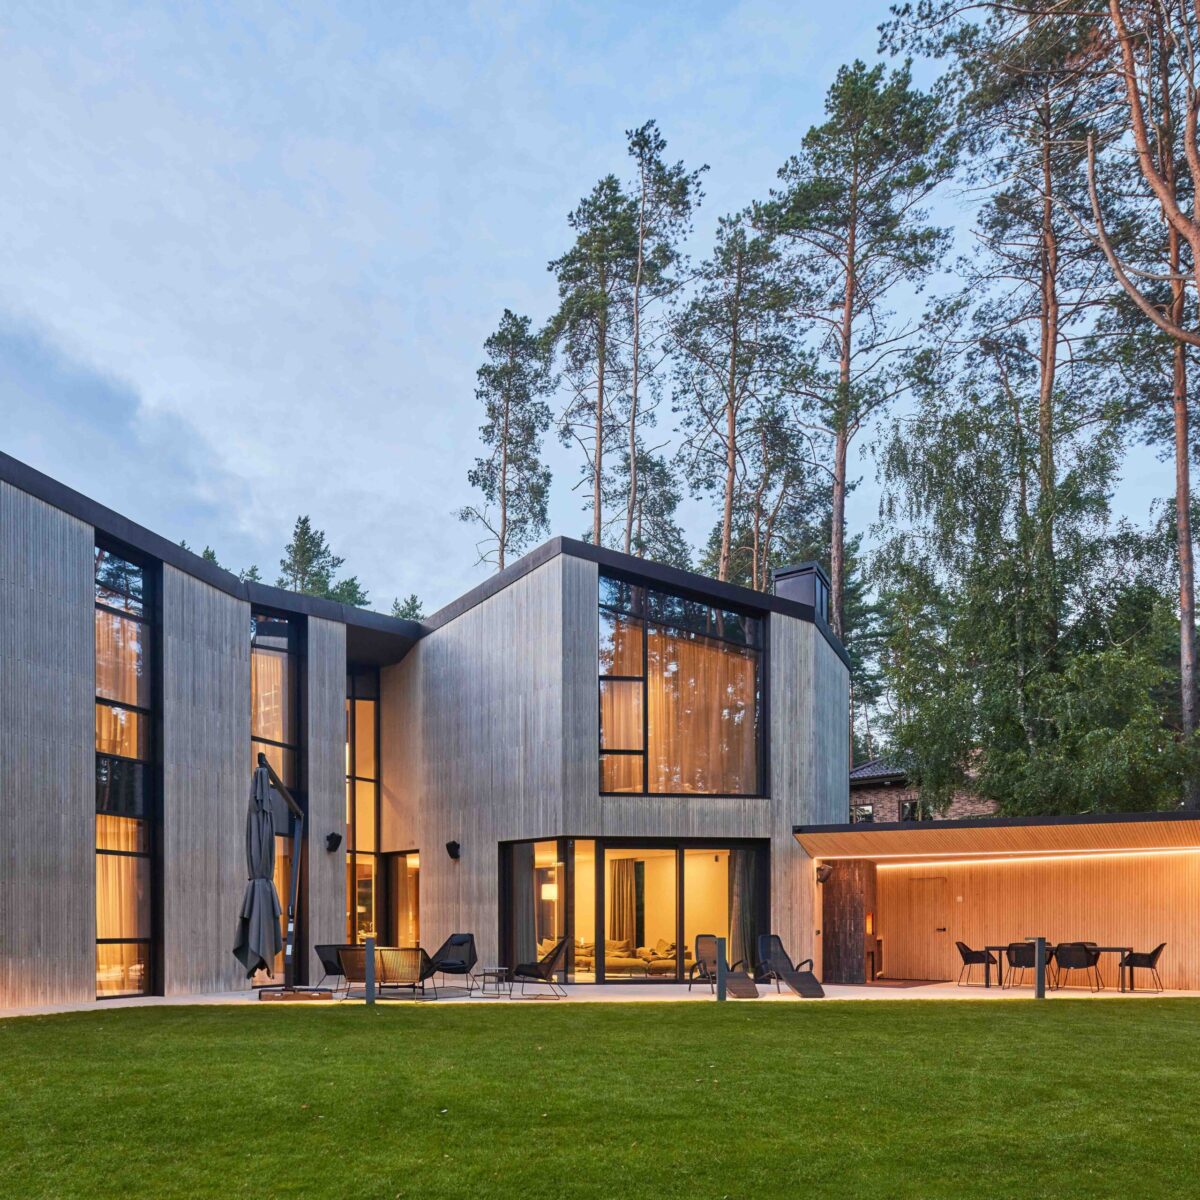 Homes in the forest Lithuania - Accoya Acetylated Wood | High ...